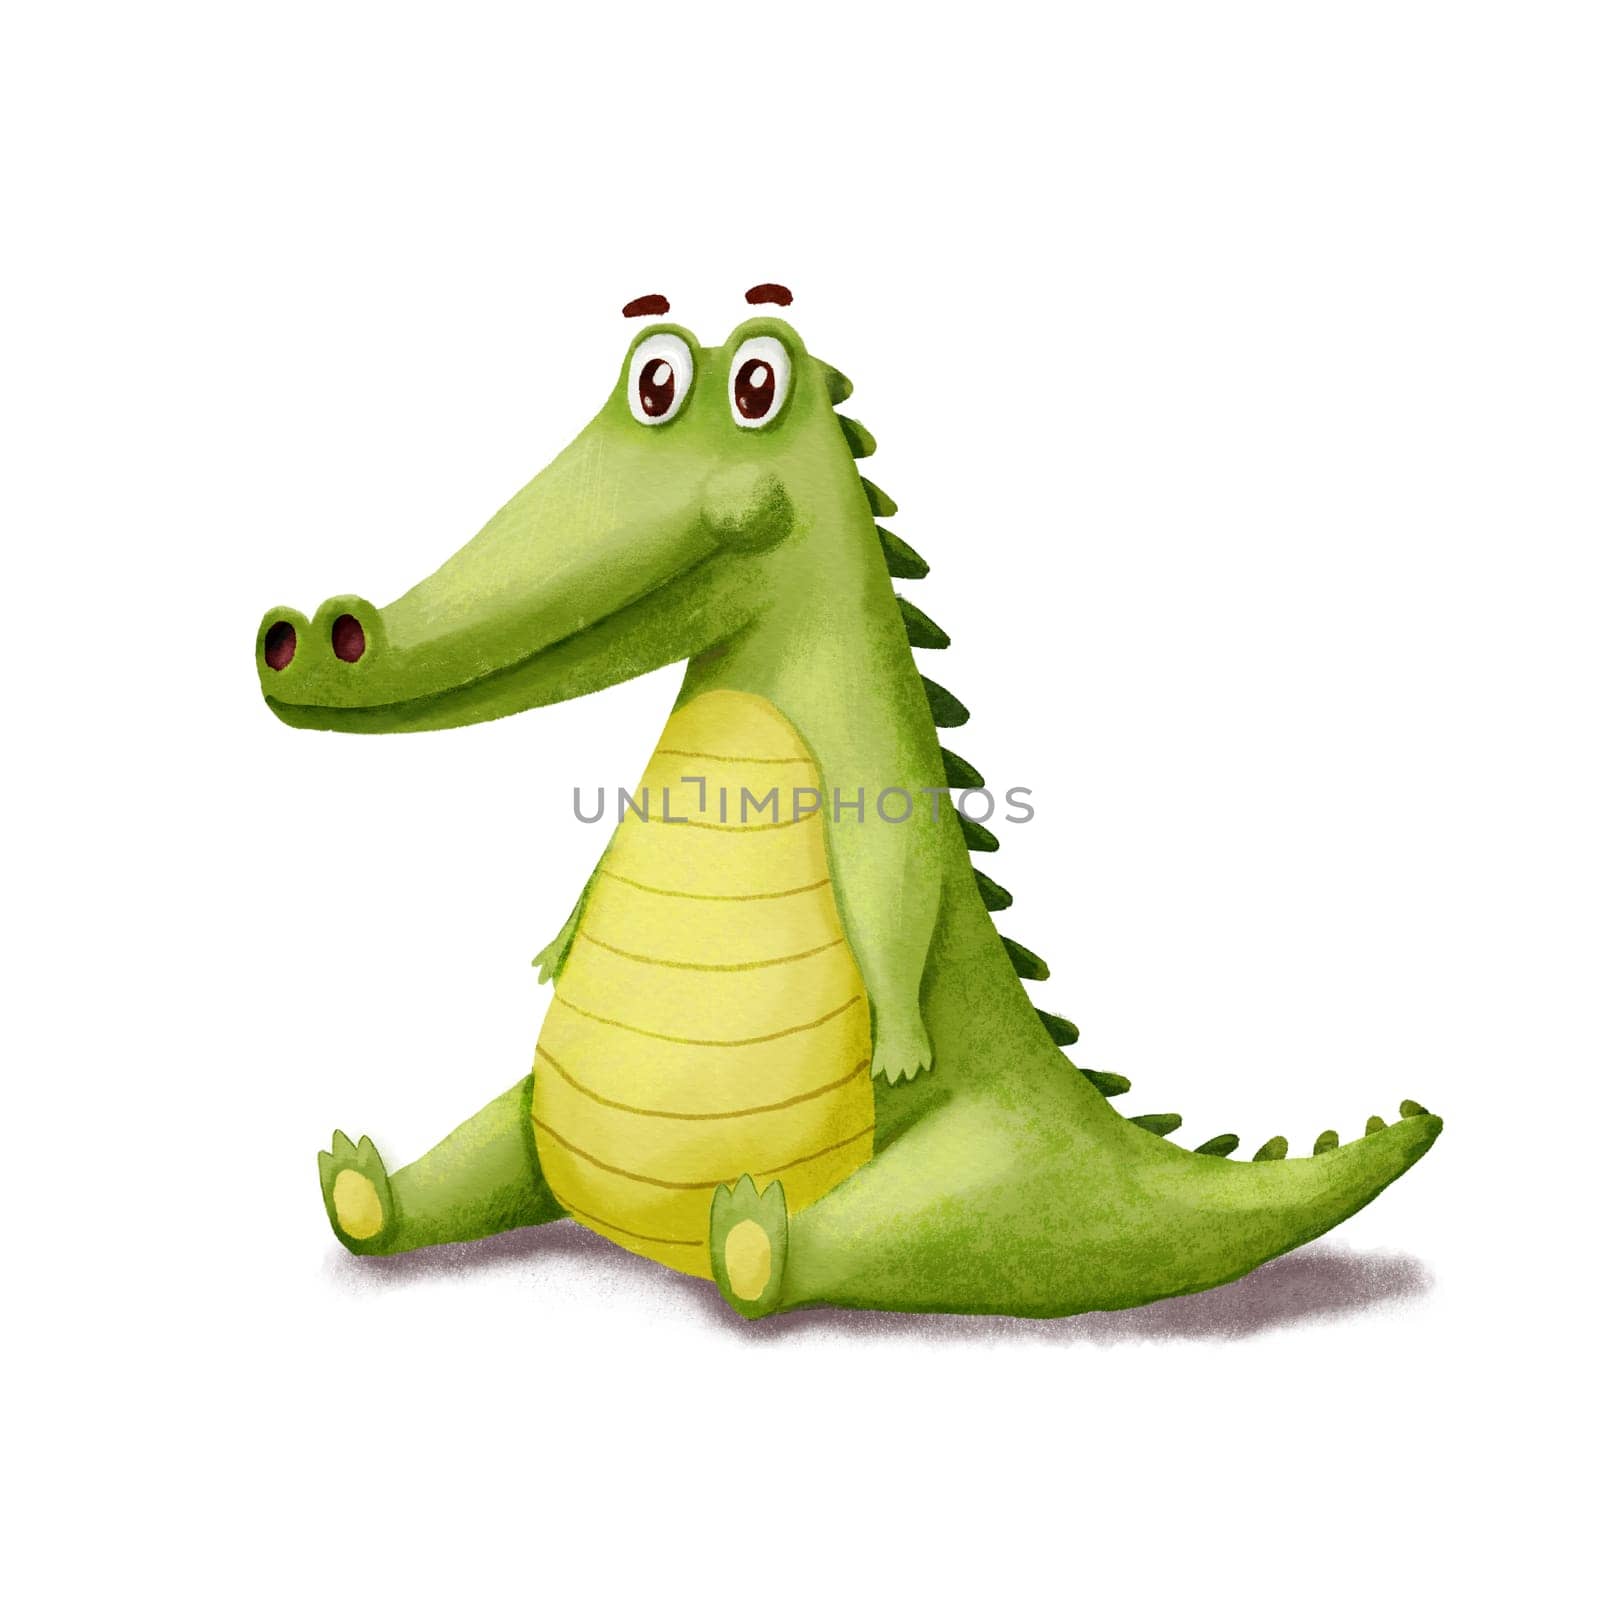 Cute Crocodile. Funny Alligator isolated on white. Cartoon hand drawn Illustration. Green Animal Character is sitting